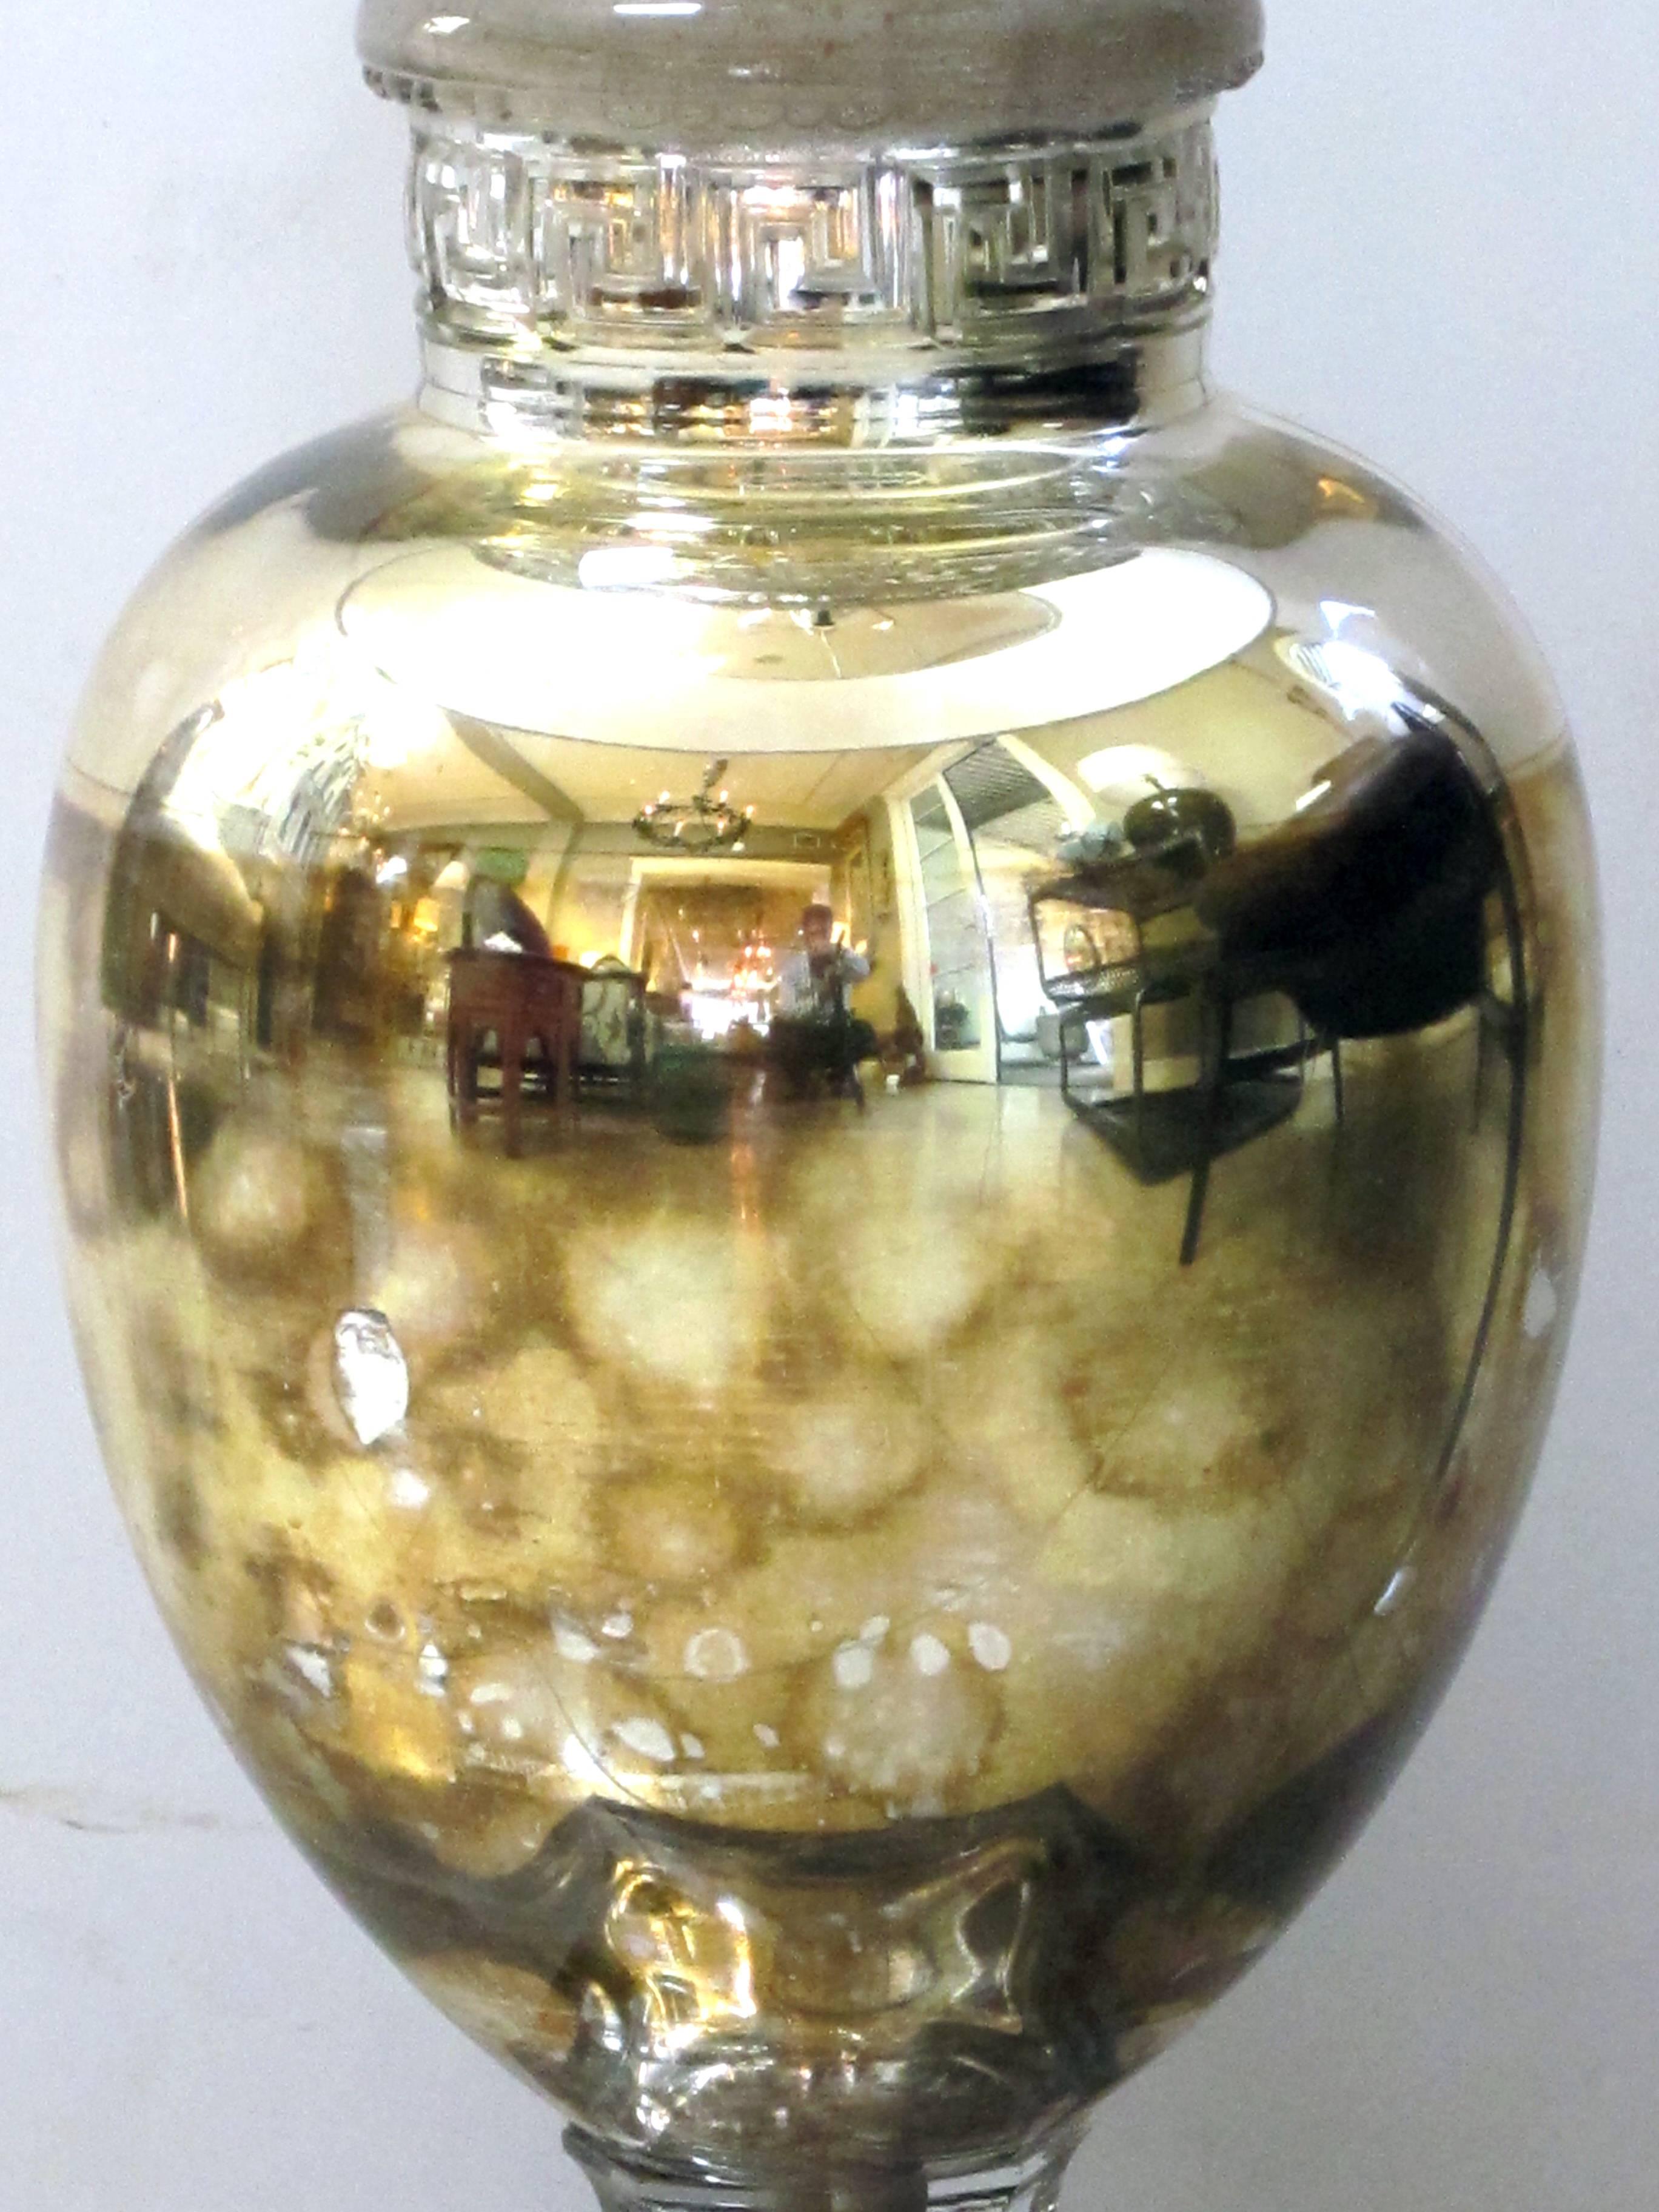 Hollywood Regency Shimmering American 1940s Mercury-Mirror Apothecary Jar Now Mounted as a Lamp